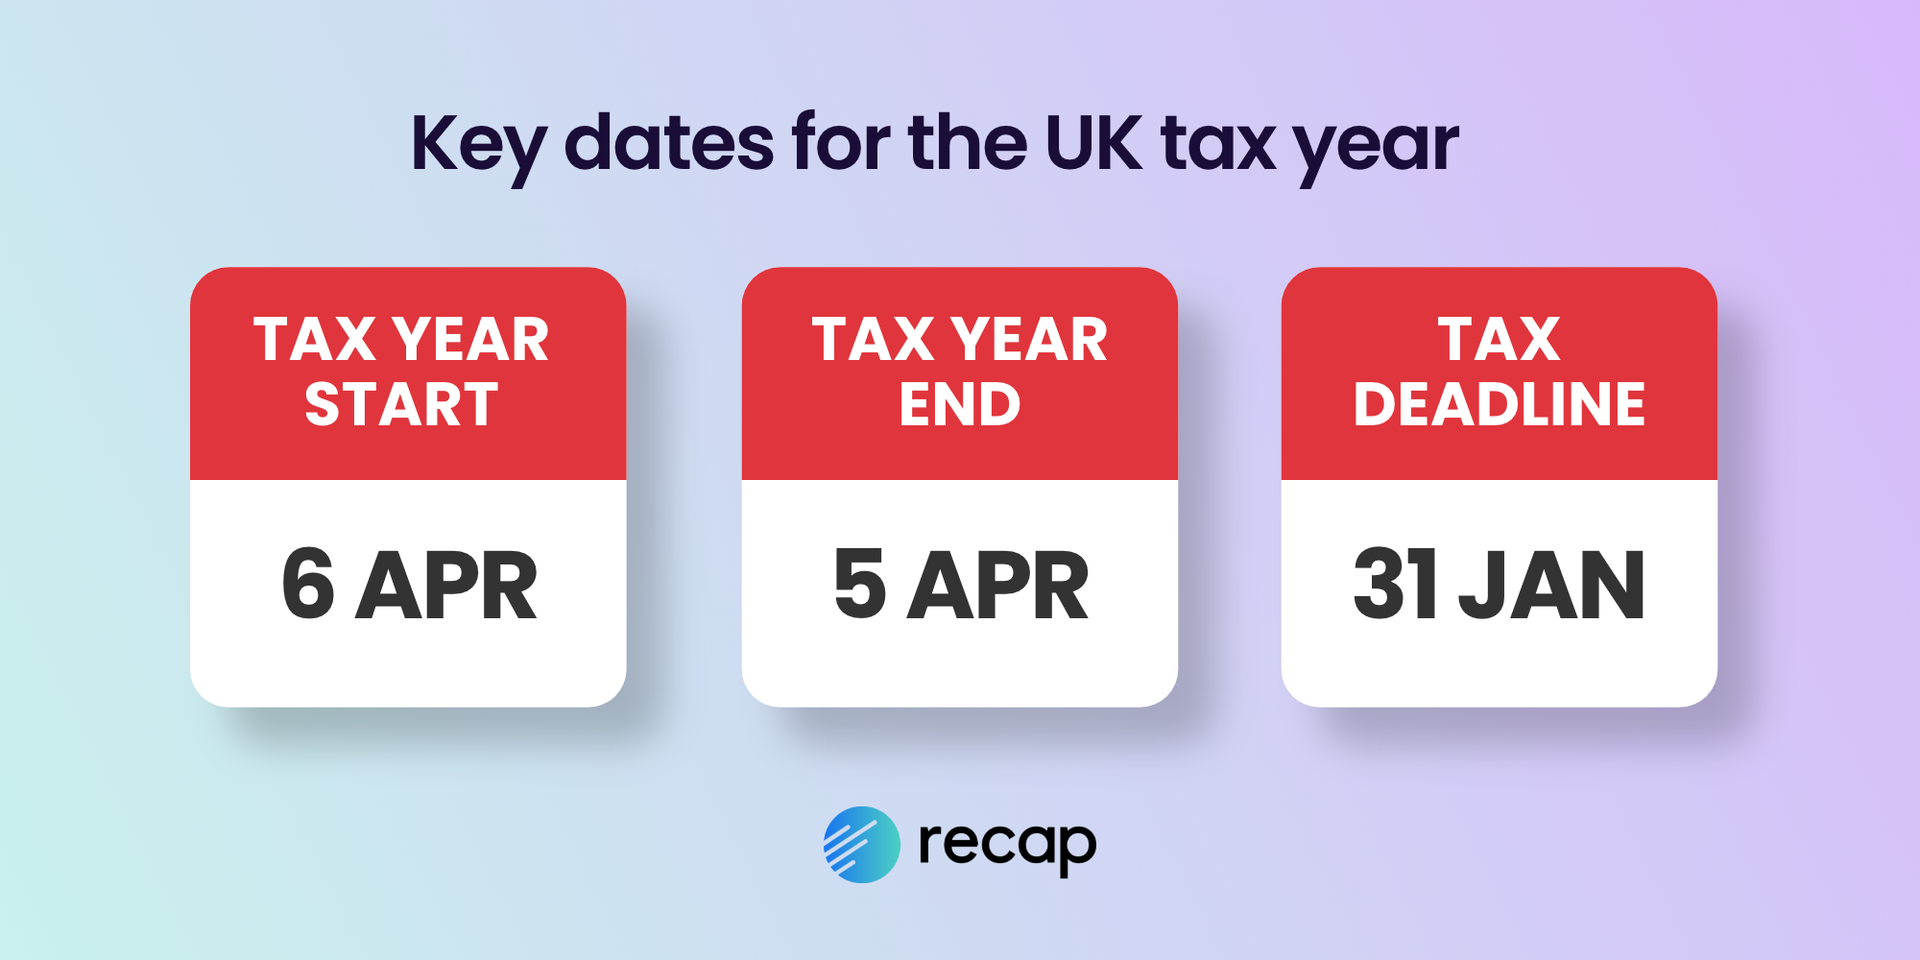 Infographic showing the key dates for the UK tax year. UK tax year starts 6th April and ends 5th April. The tax deadline is 31st January.